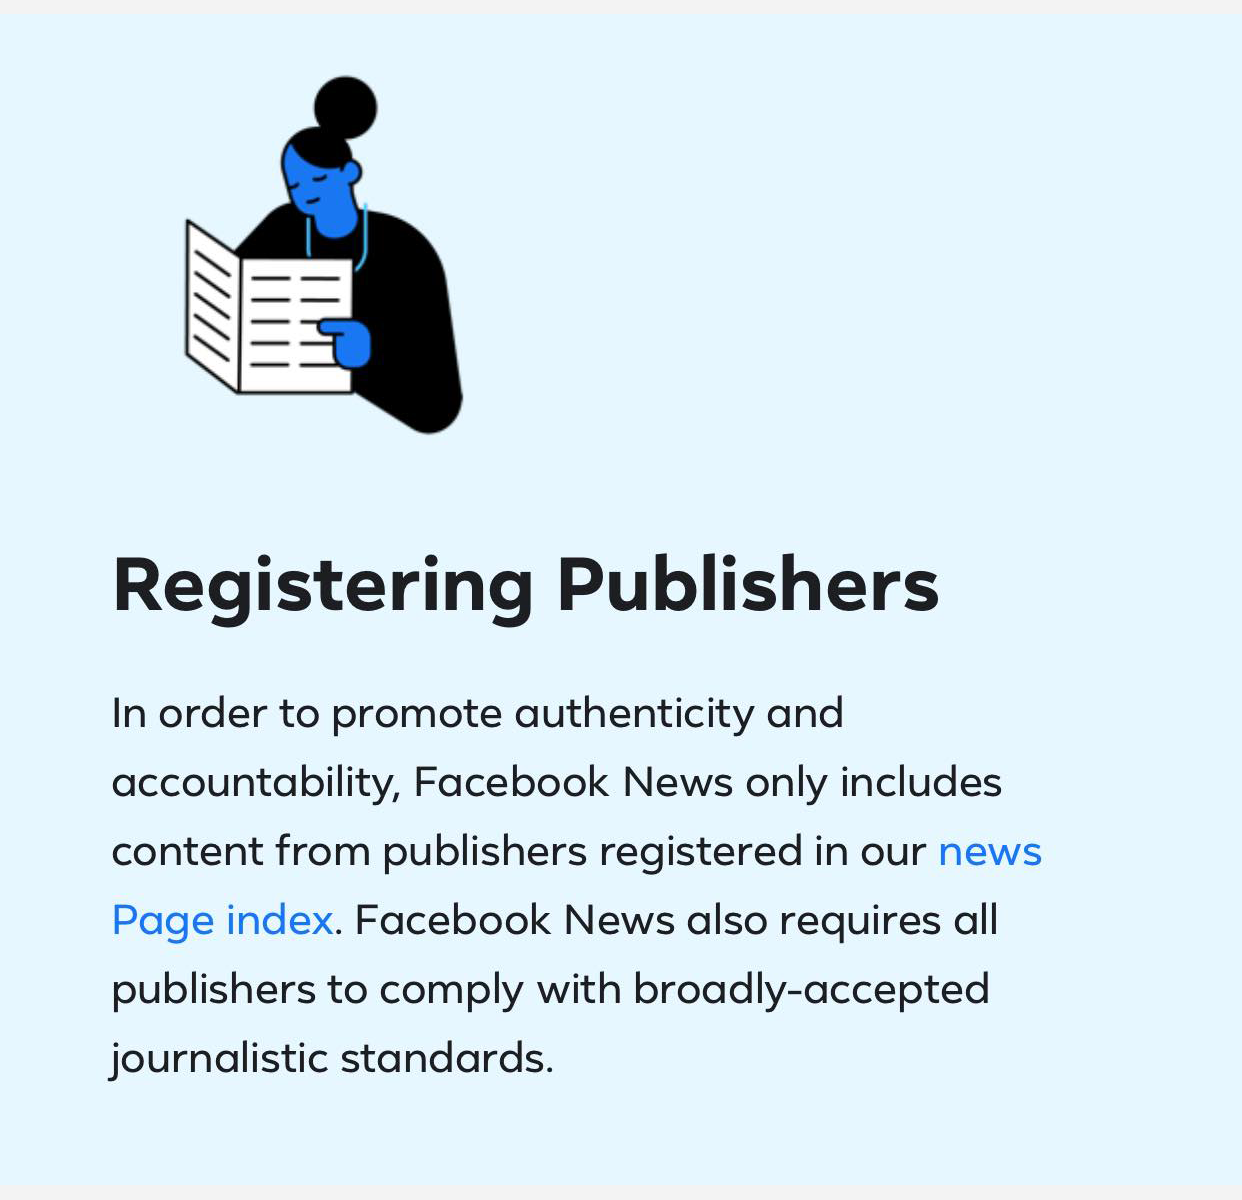 Facebook News talks about its registered publishers